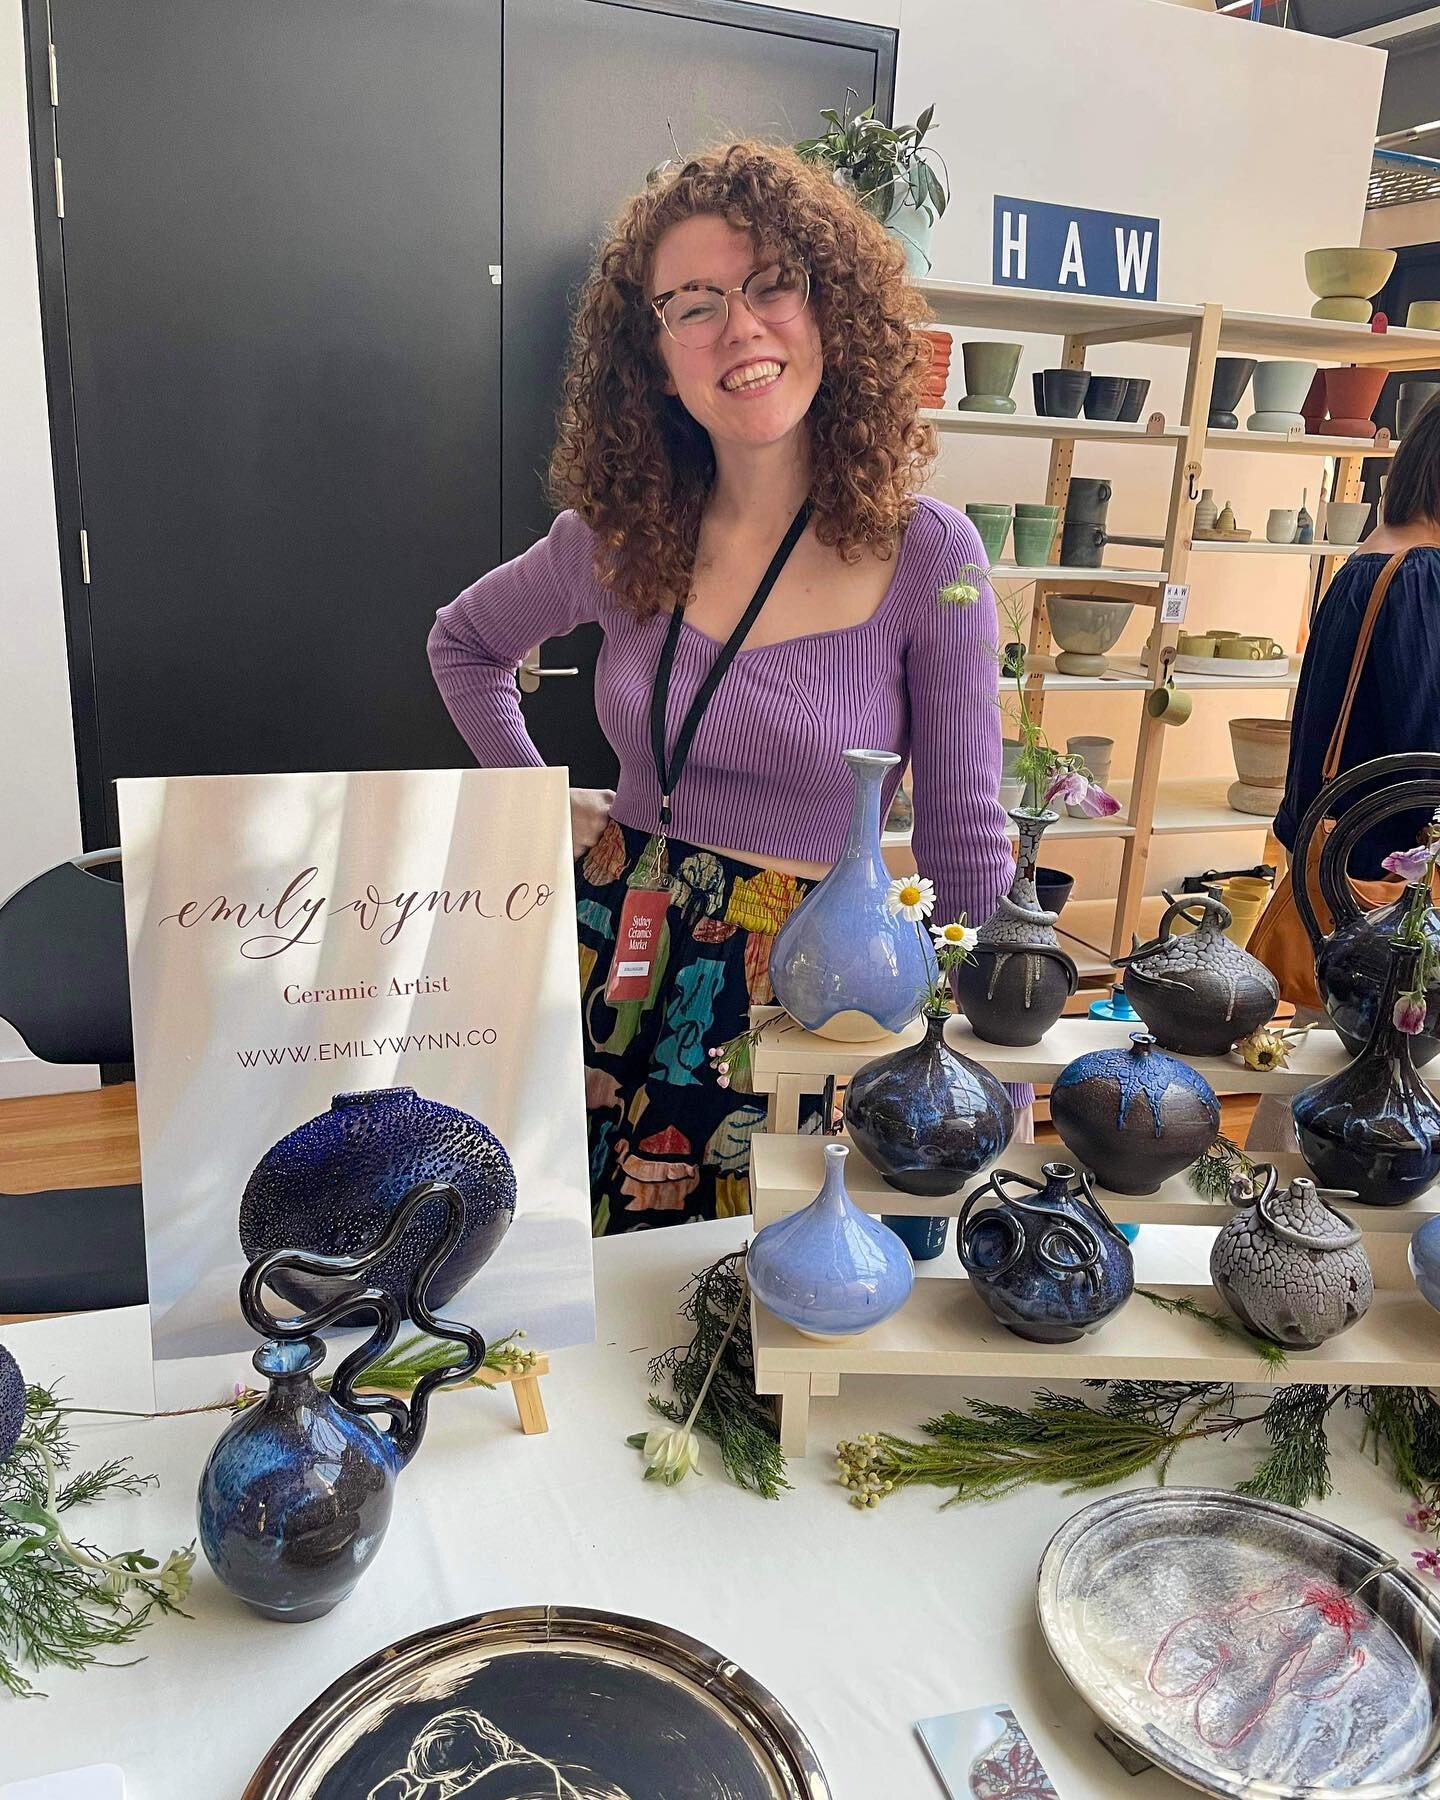 Last Sunday at the @sydneyceramicsmarket was the most phenomenal, wonderful and brilliant day that I can&rsquo;t stop smiling about!
To have the honour to stand beside so many talented ceramicists and see people who were so excited to celebrate ceram